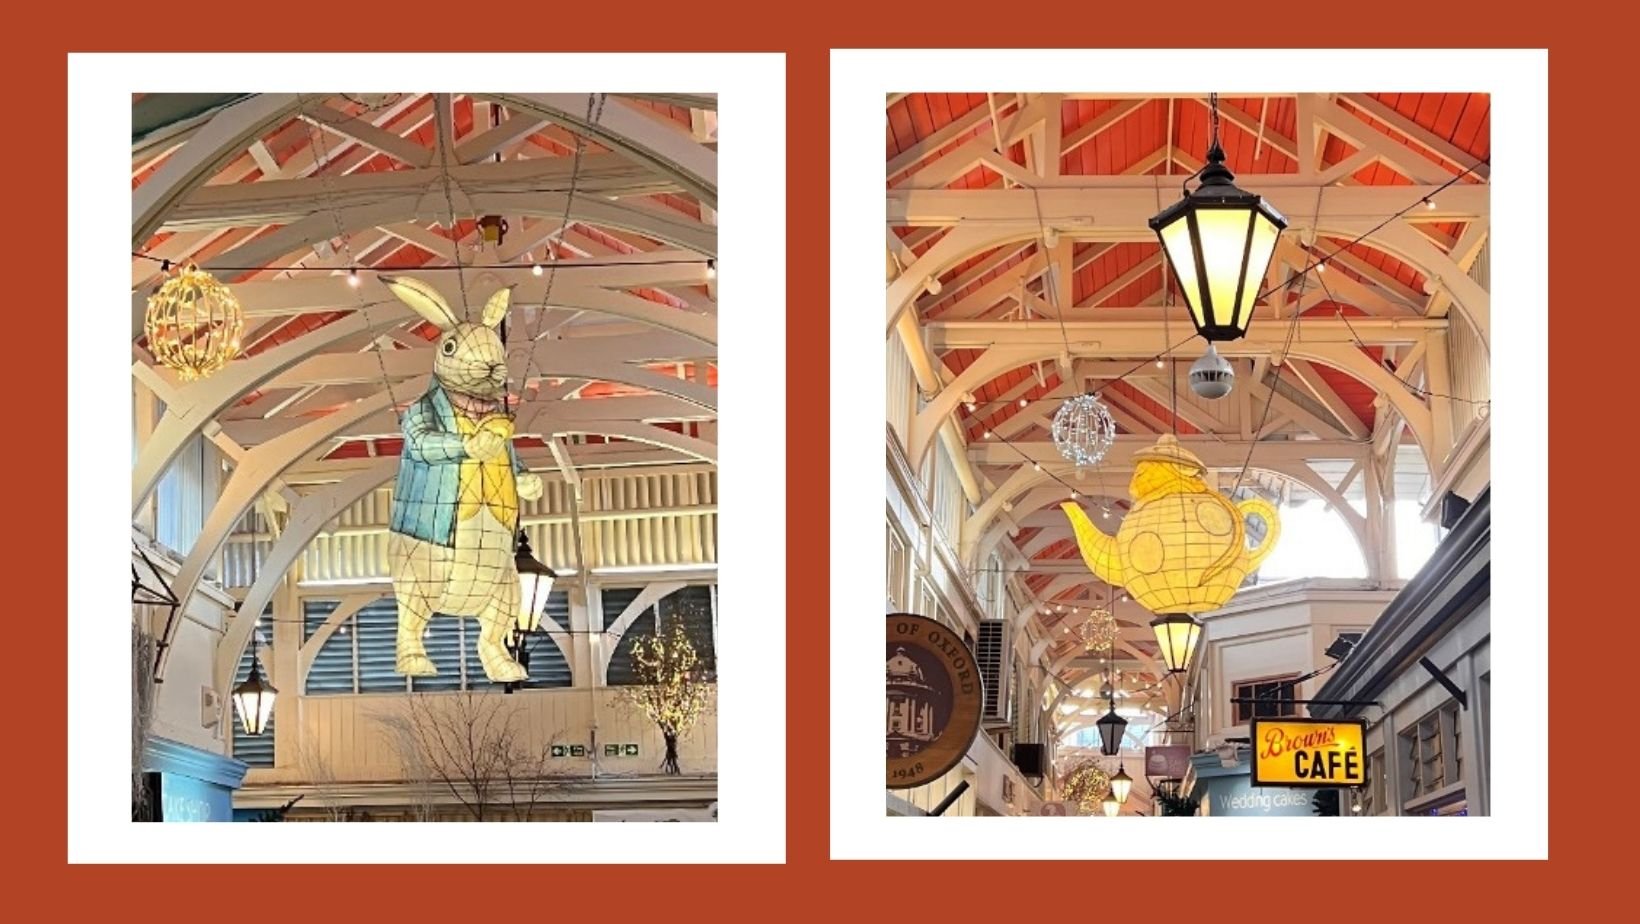 Two framed images of a rabbit and a teapot from Alice in Wonderland hanging in covered market.